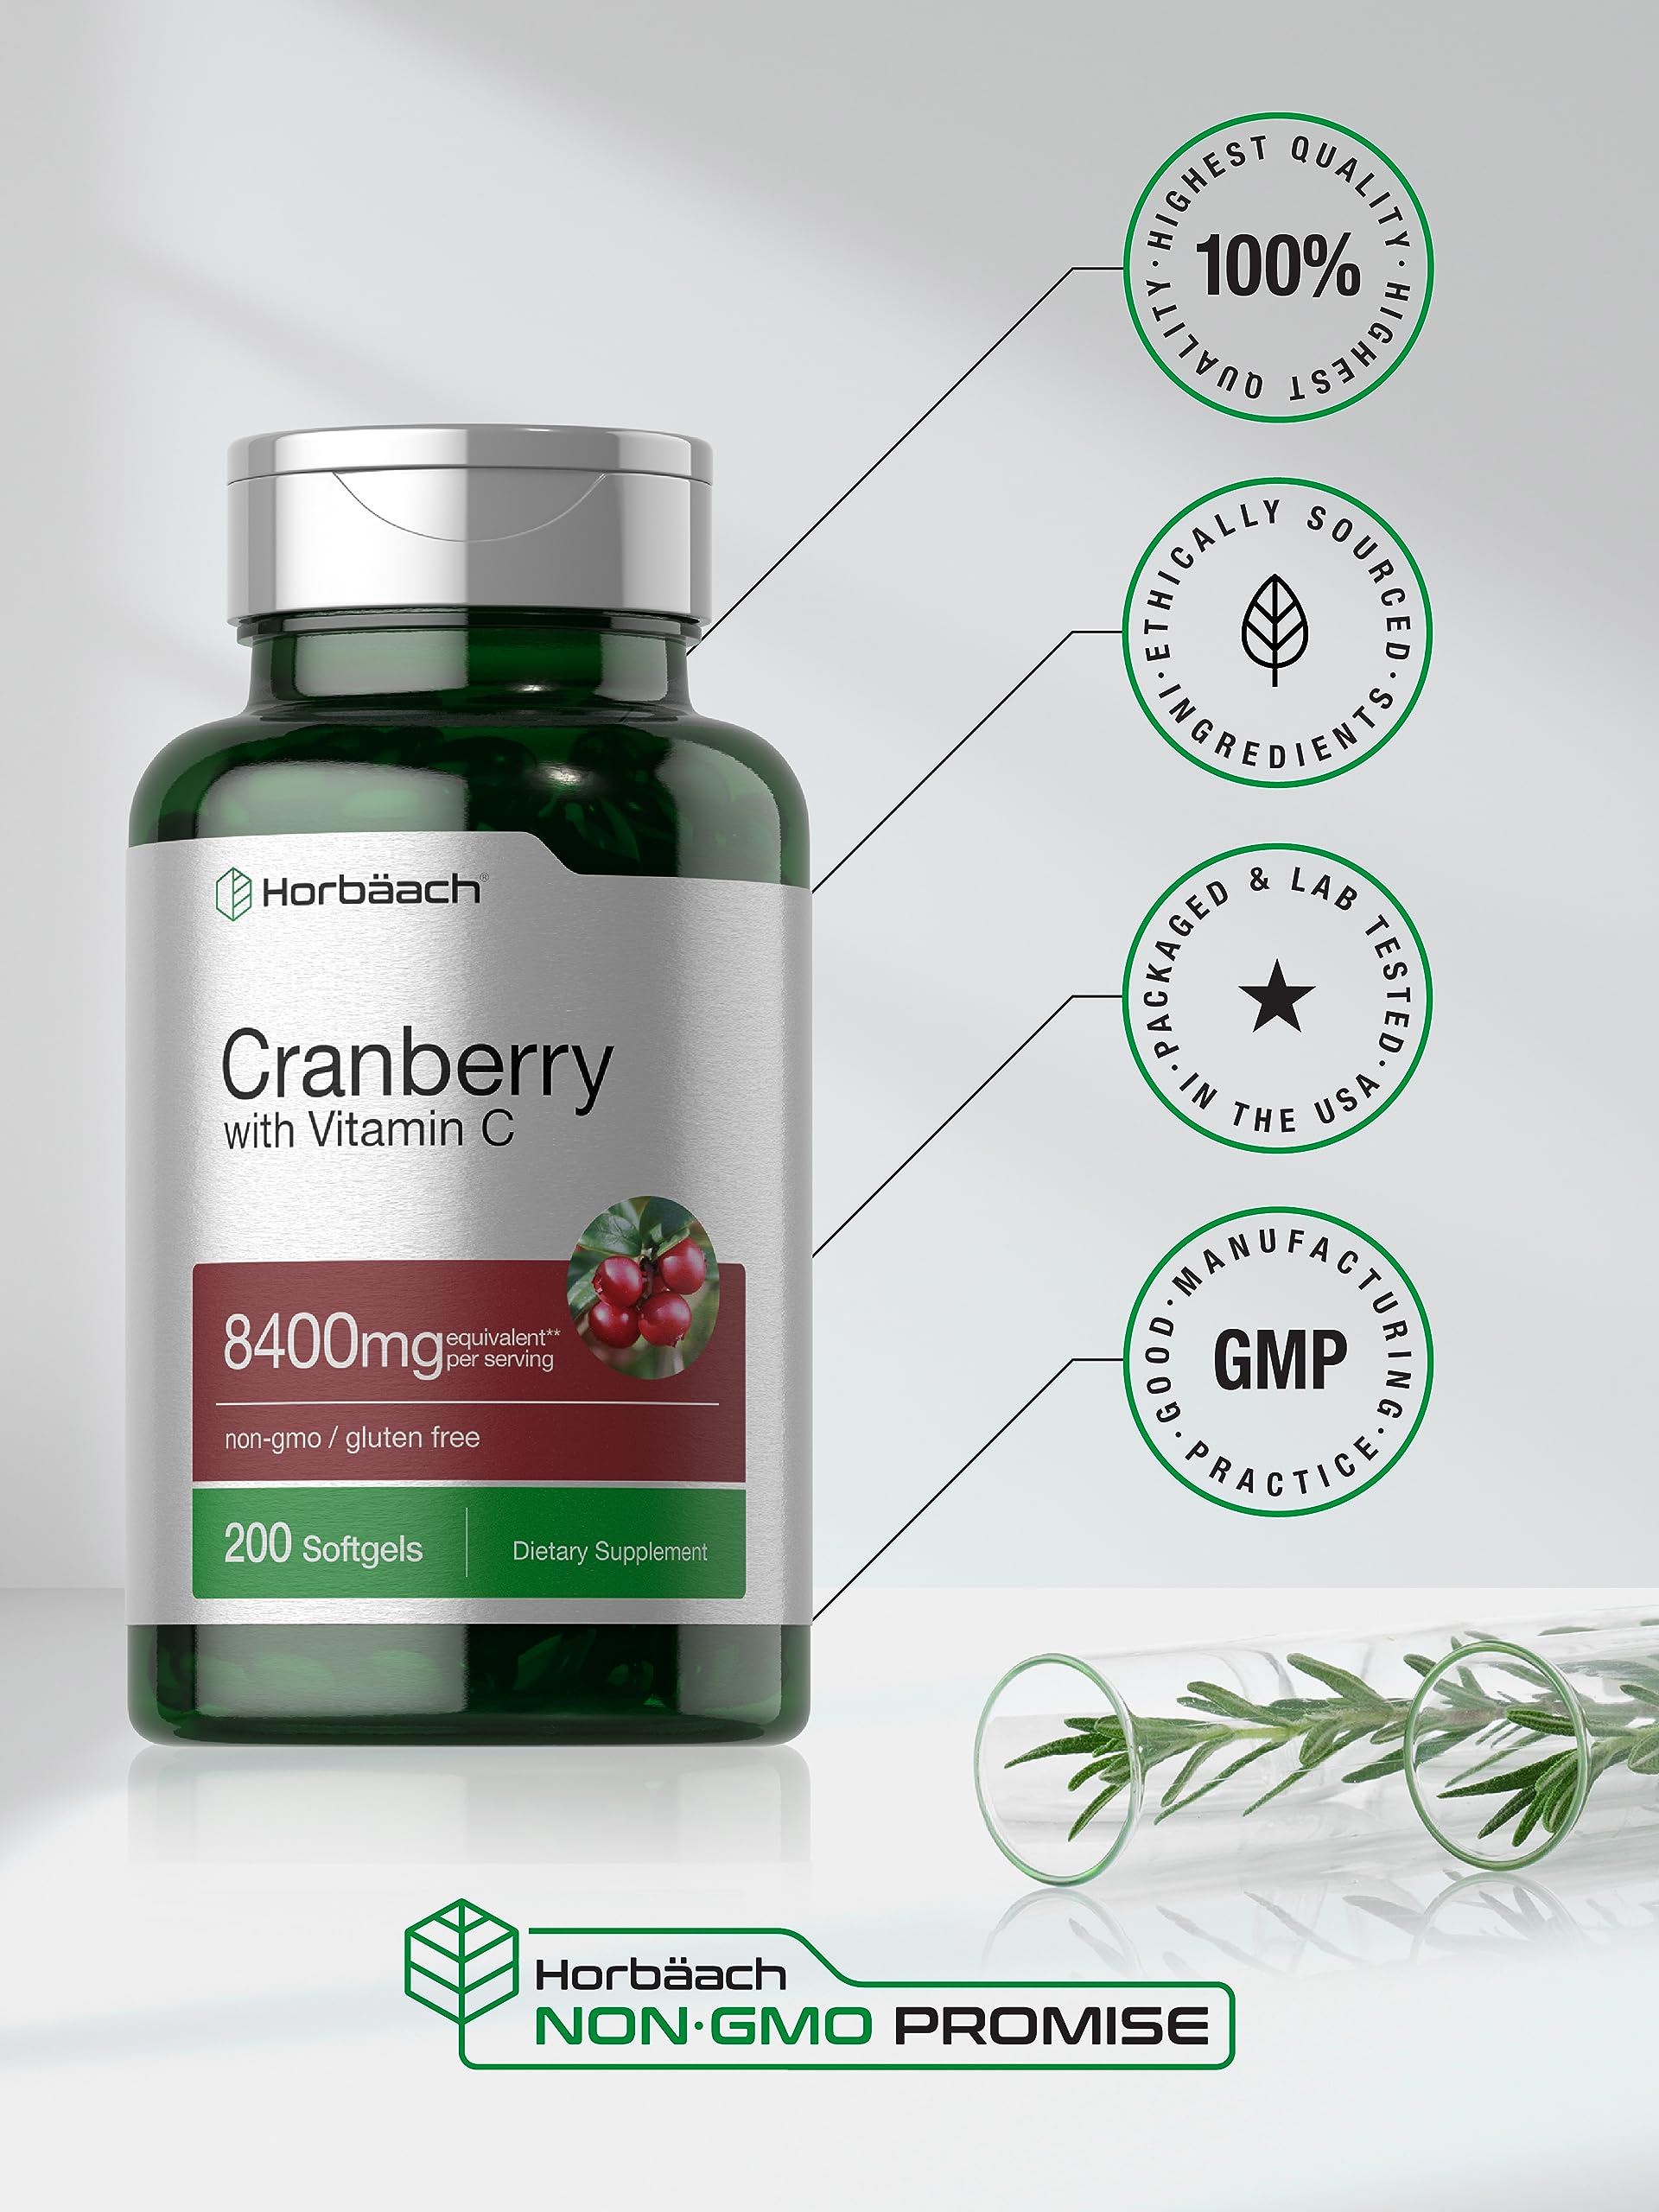 Cranberry Pills with Vitamin C | 8400mg | 200 Softgels | Concentrate Extract Supplement | Non-GMO, Gluten Free by Horbaach